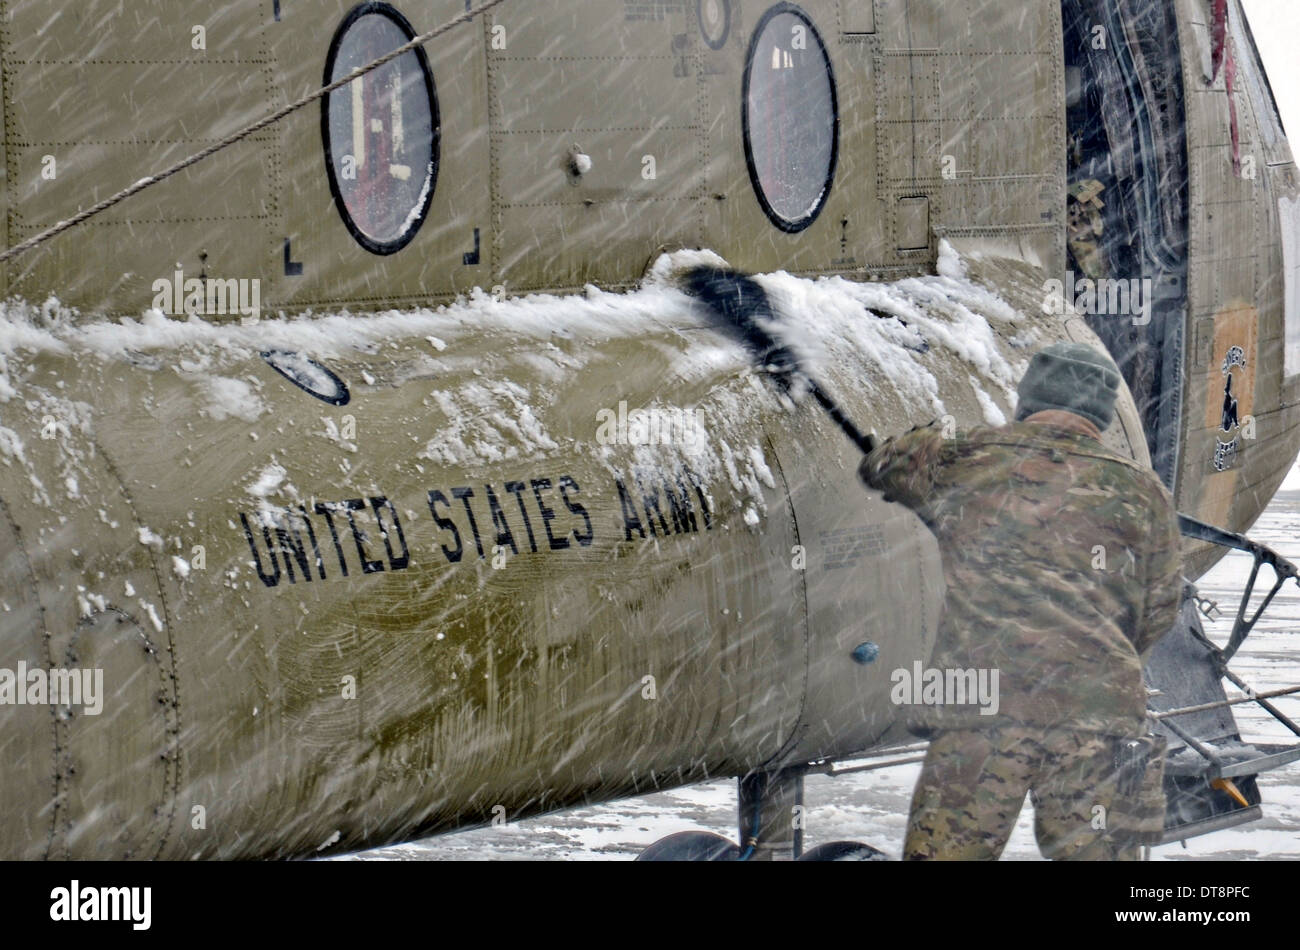 us-soldiers-sweep-snow-off-a-ch-47-chinook-helicopter-during-a-winter-DT8PFC.jpg